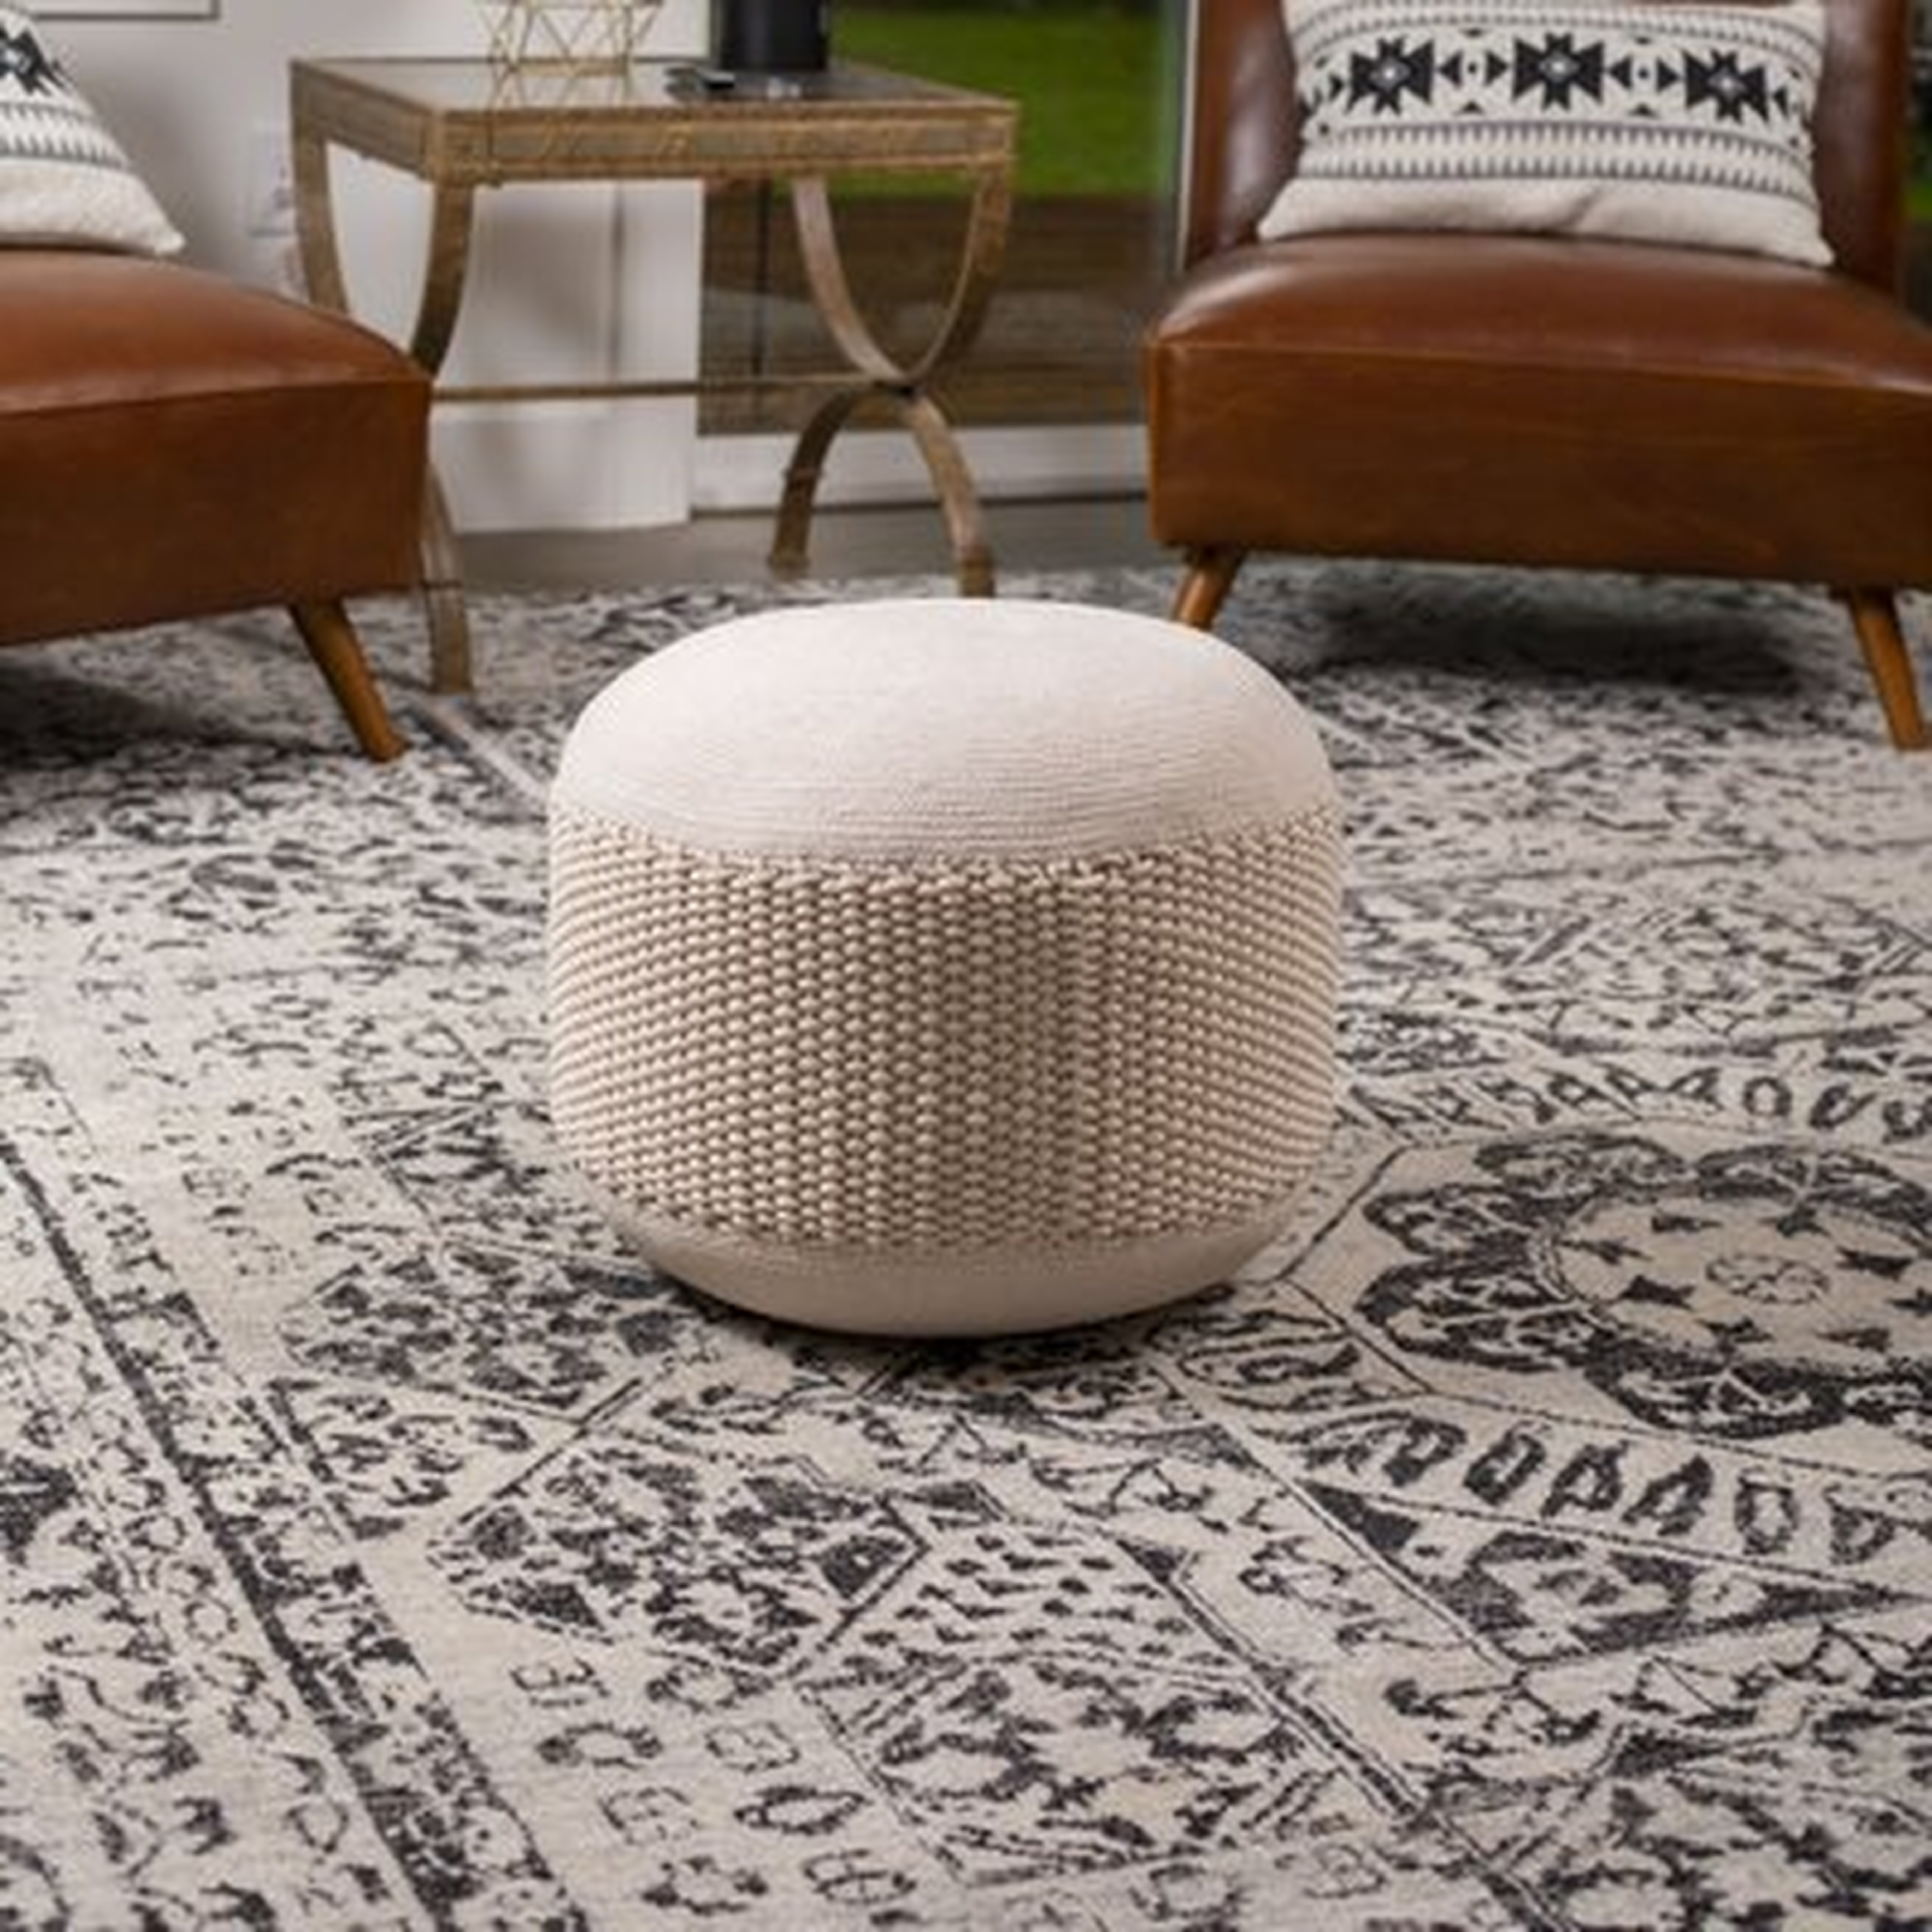 Dovecove Outdoor Pouf Ottoman - Natural - Woven Indoor Or Backyard Patio Use - Floor Footstool For Living Room- Knit Bean Bag - Oversized Padded Chair - Moroccan Foot Rest - Wayfair